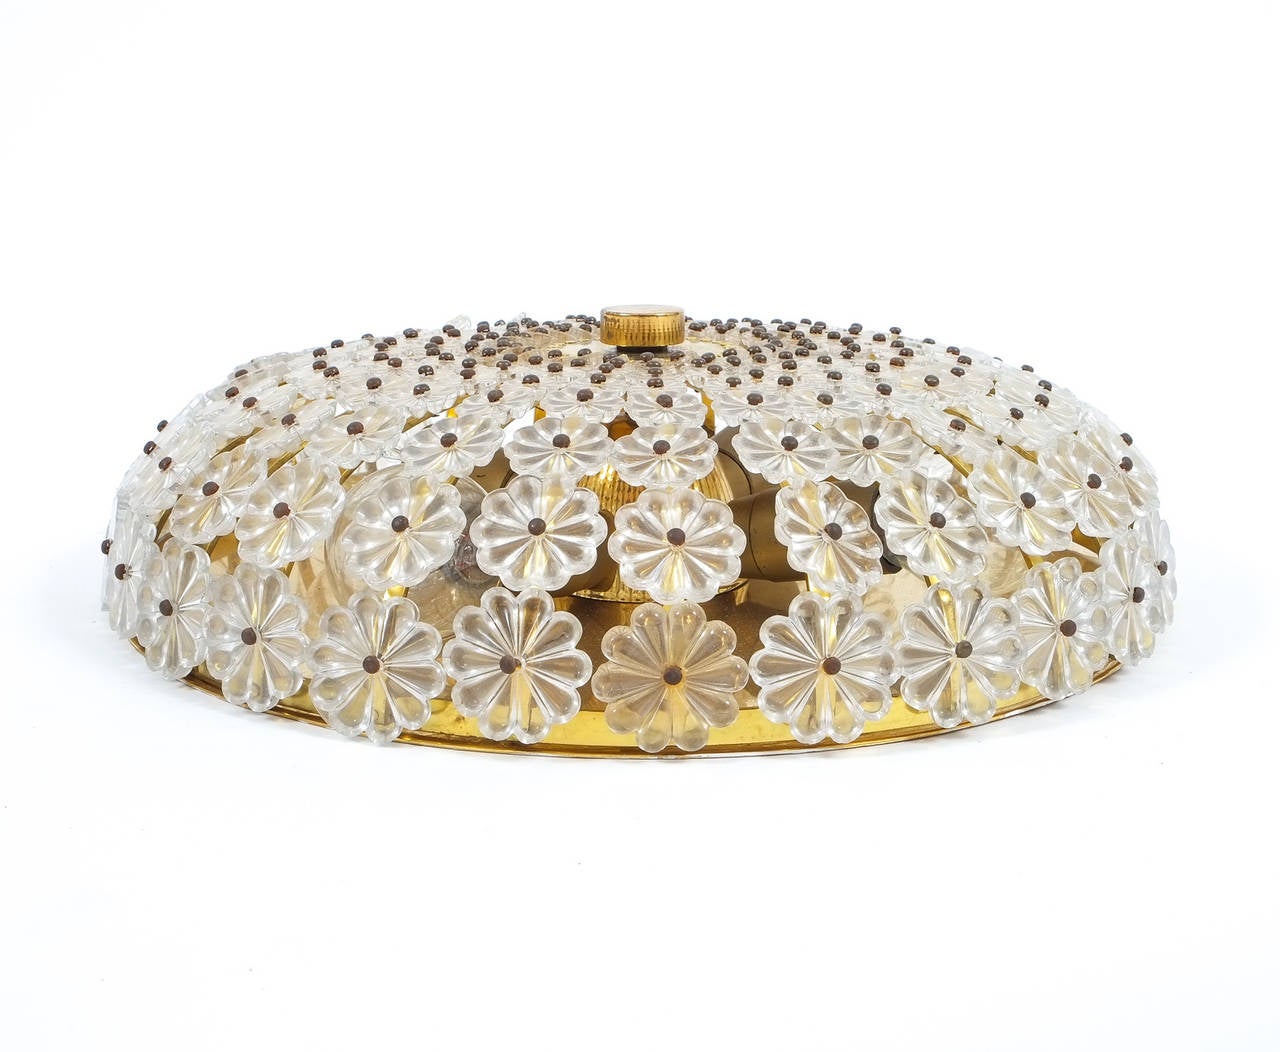 Nice petite 12.2 inch  flower flush mount by Emil Stejnar, Austria, circa 1960 made from brass and lucite. This light features four lights with 40W each and is in very good refurbished/rewired condition.

 